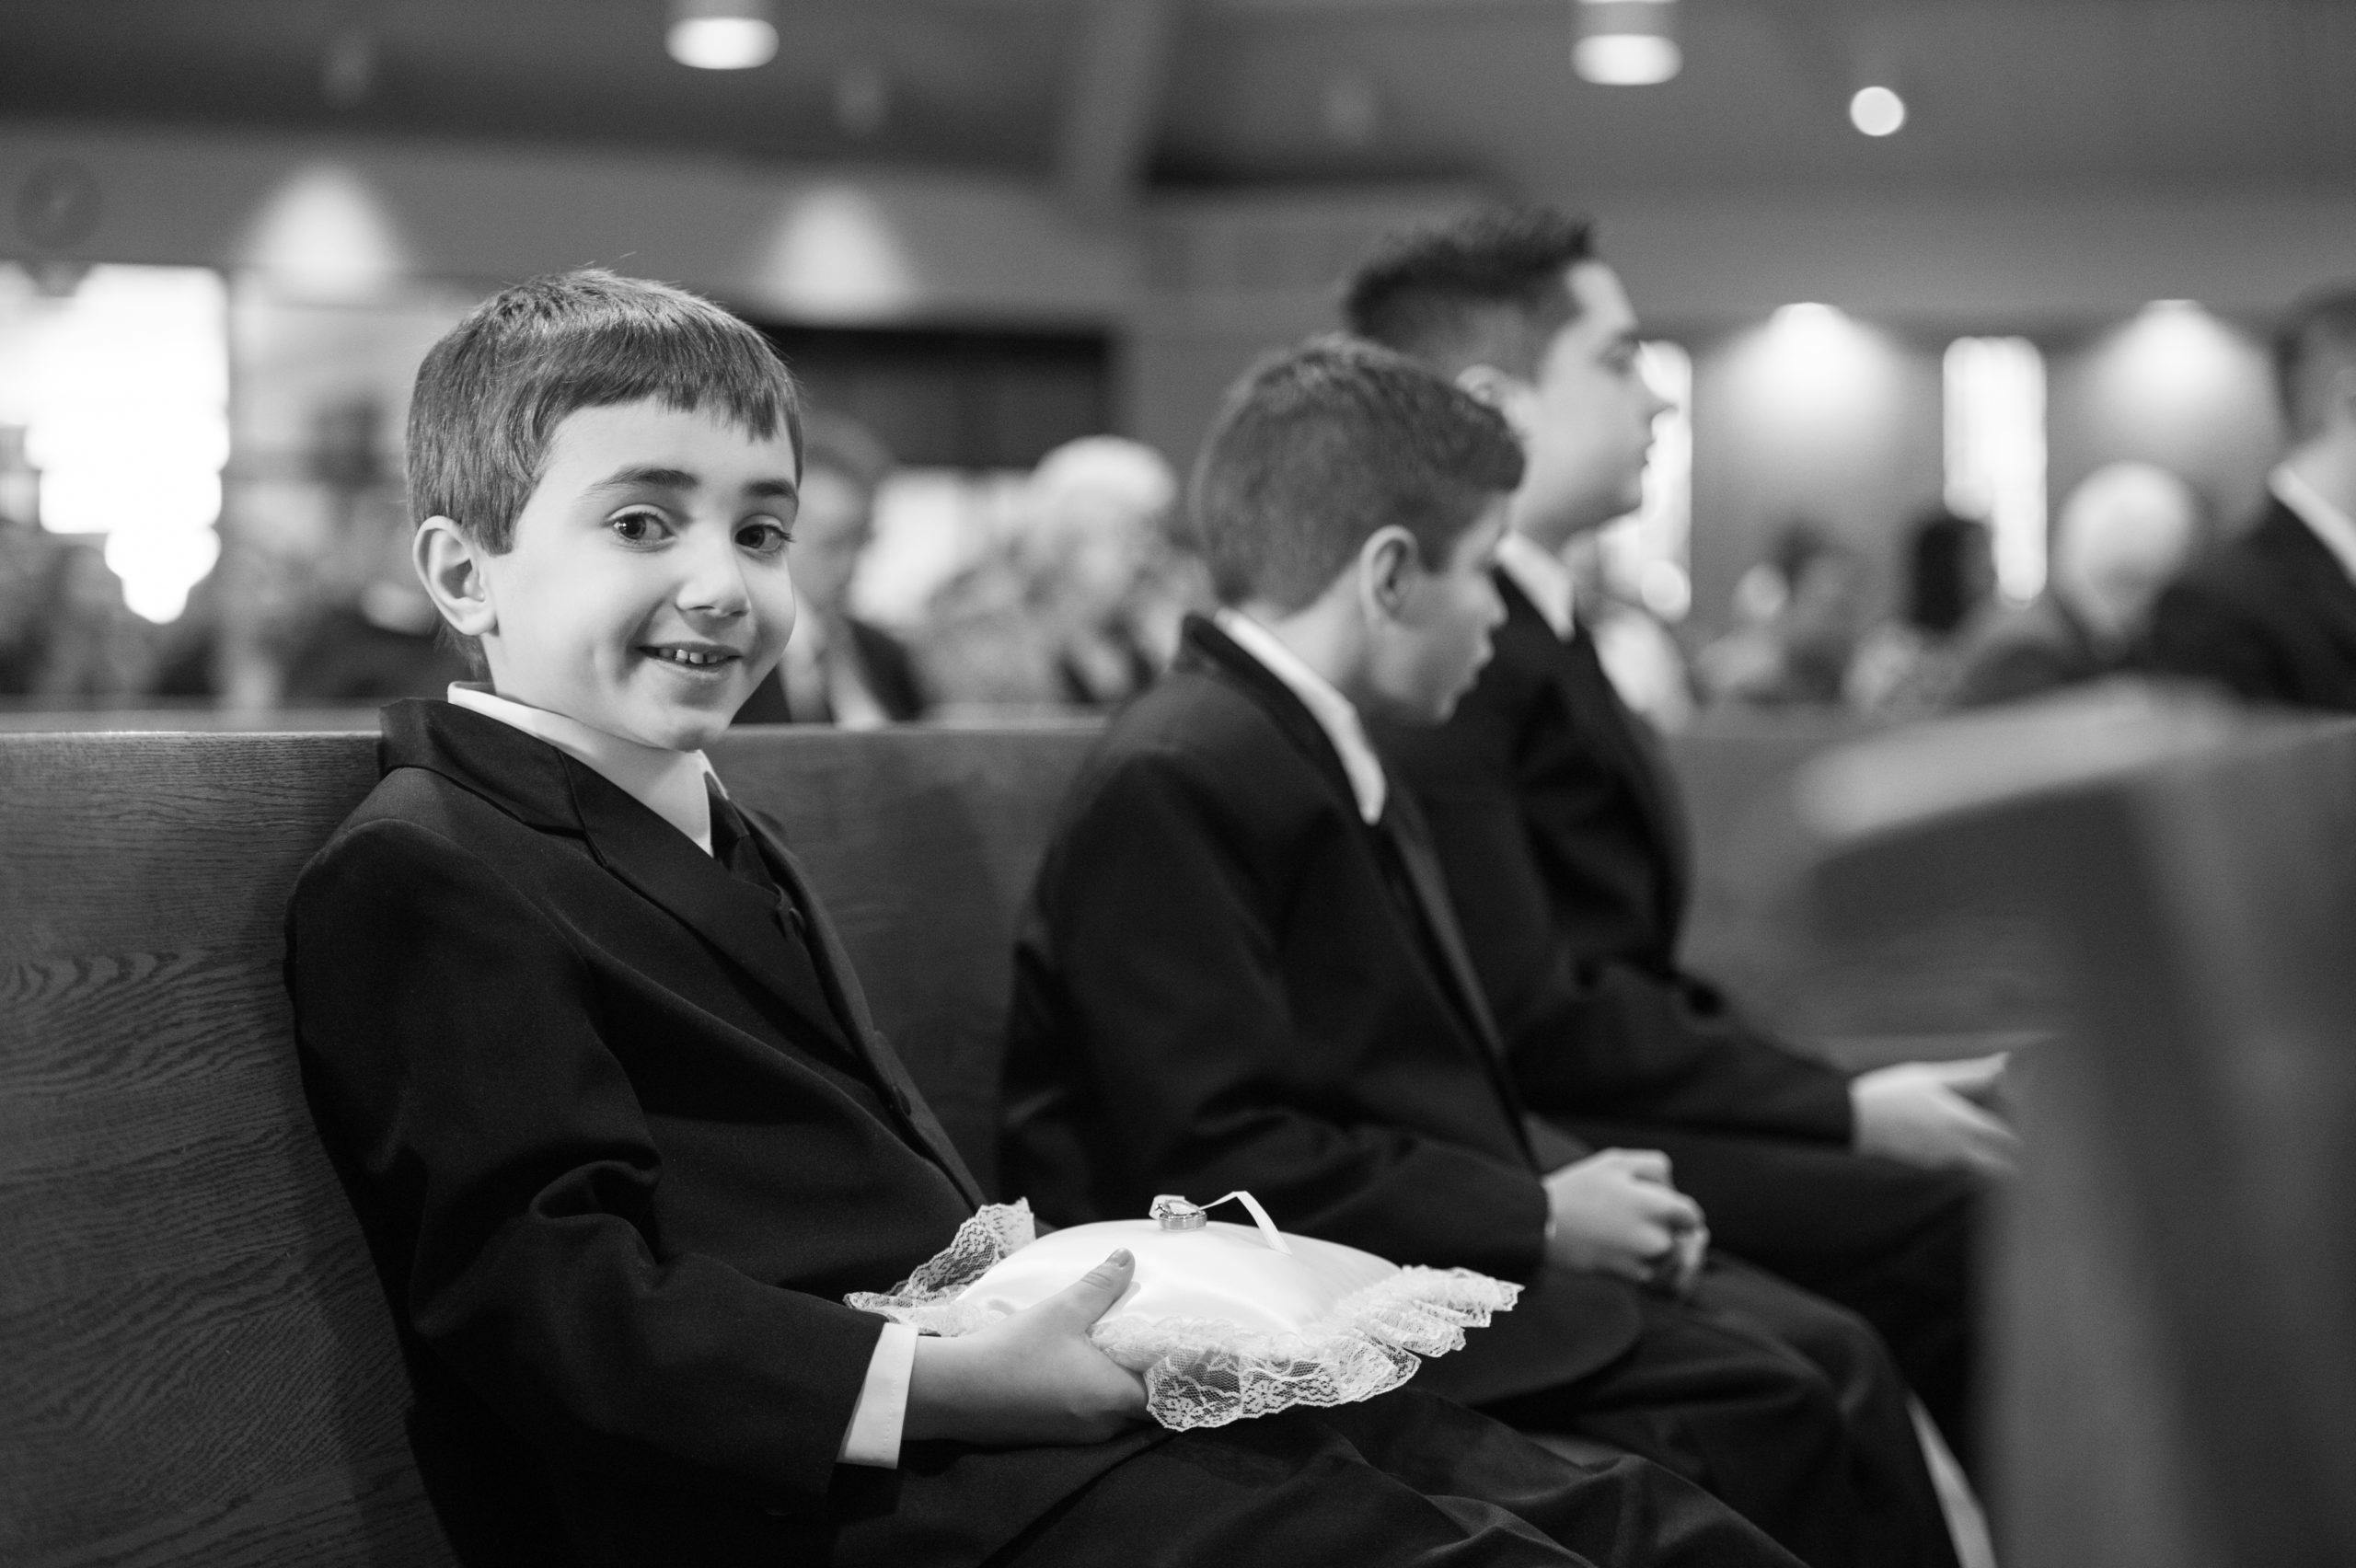 Black and white photo of two young boys sitting in church pue l PartySlate